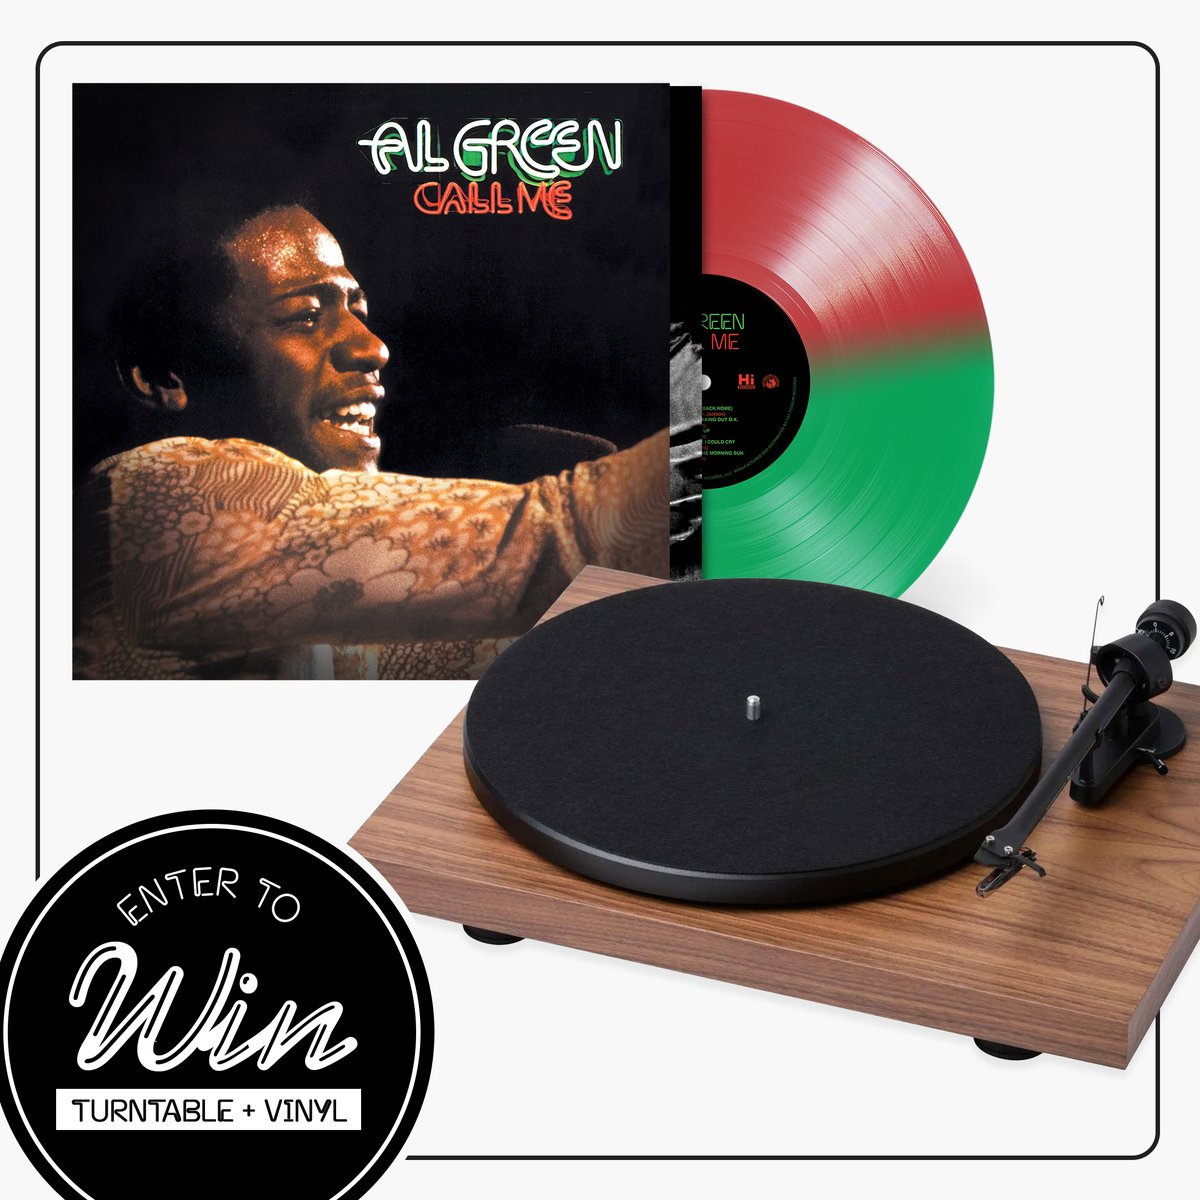 CONTEST ALERT! With a little help from our buddies at Project USA we’re giving away a Pro-Ject Debut III Phono SB Turntable so one lucky winner can enjoy a fresh print of “Call Me” for the 50th anniversary of the timeless Al Green album. Enter now. ffm.to/algreen-callme…